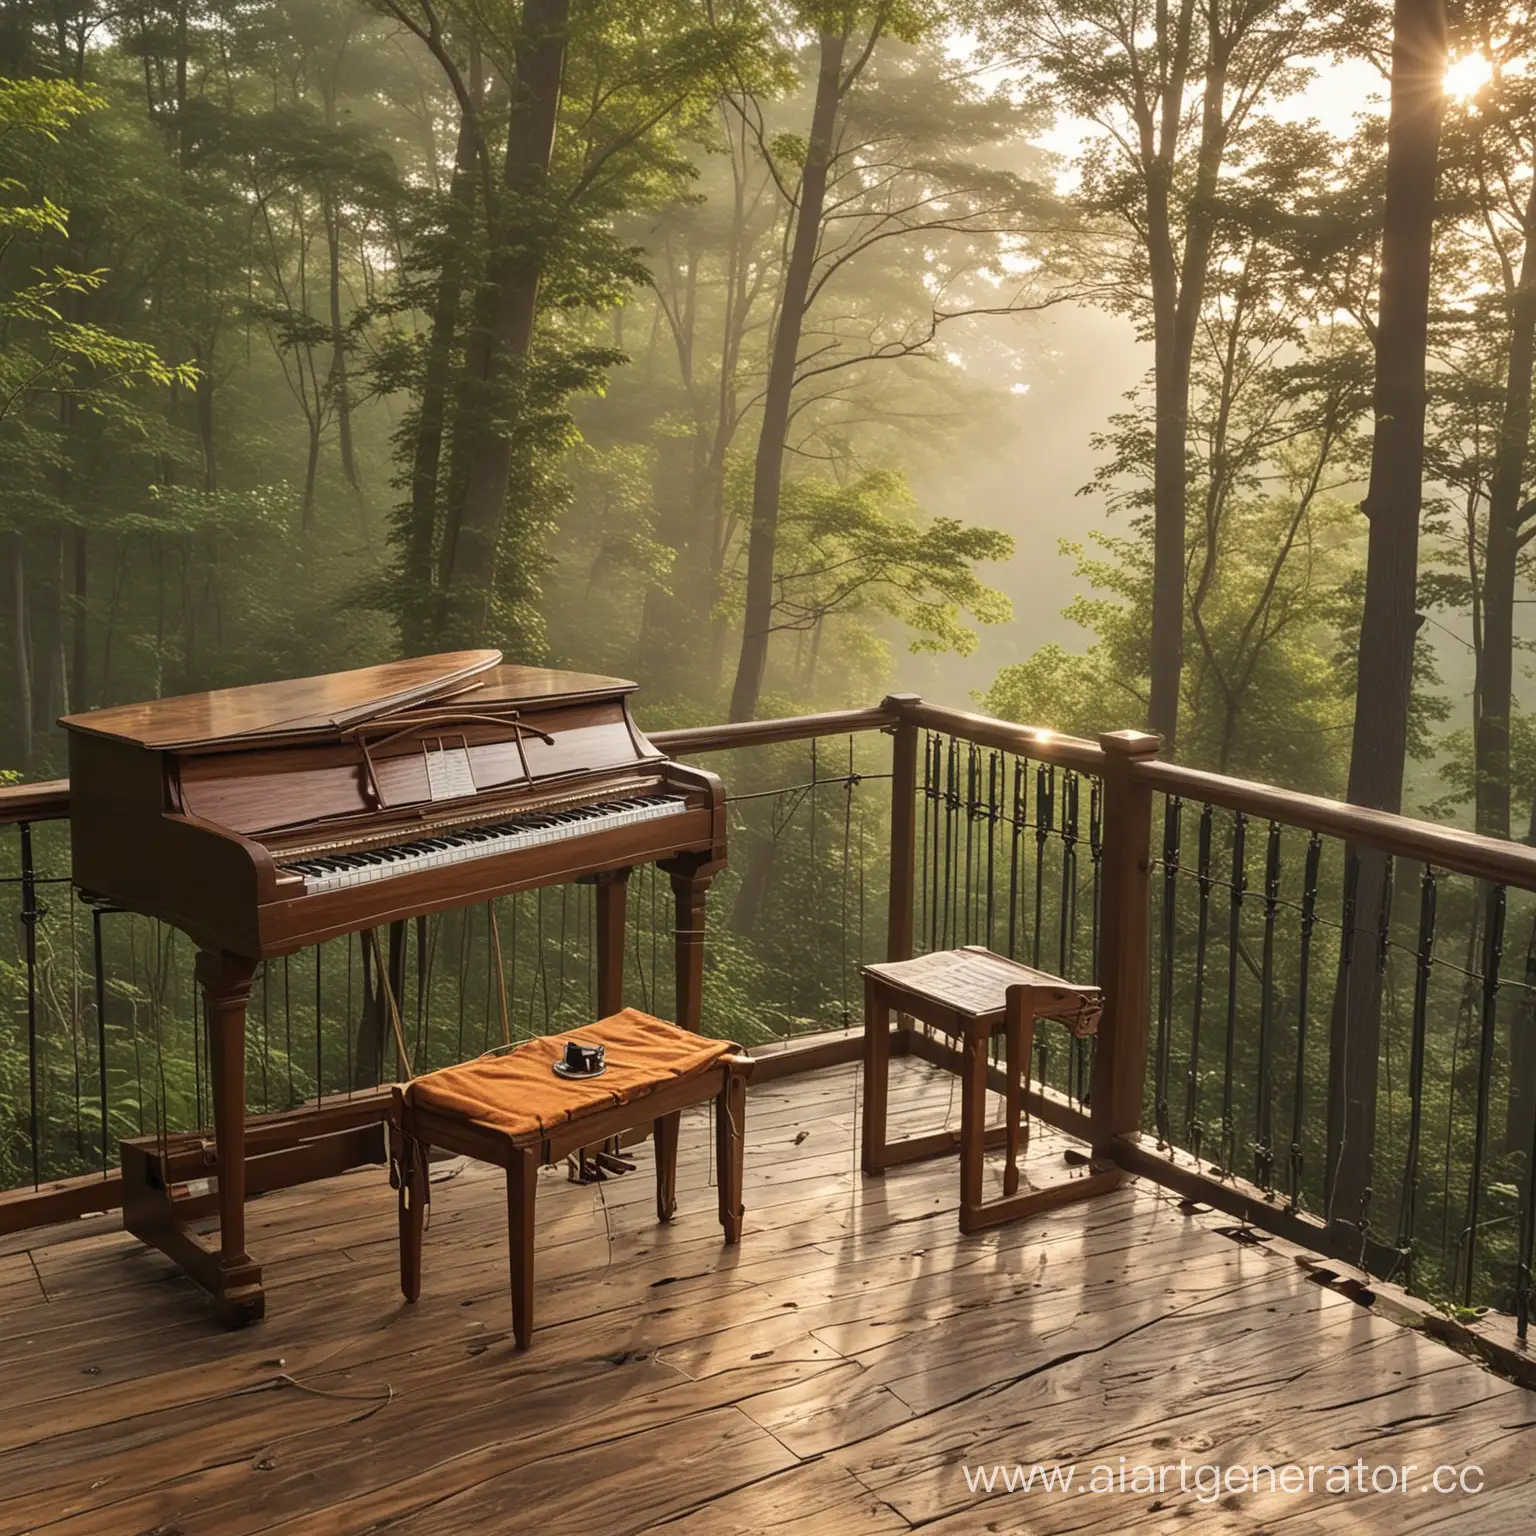 Morning-Relaxation-with-Piano-and-Strings-on-the-Deck